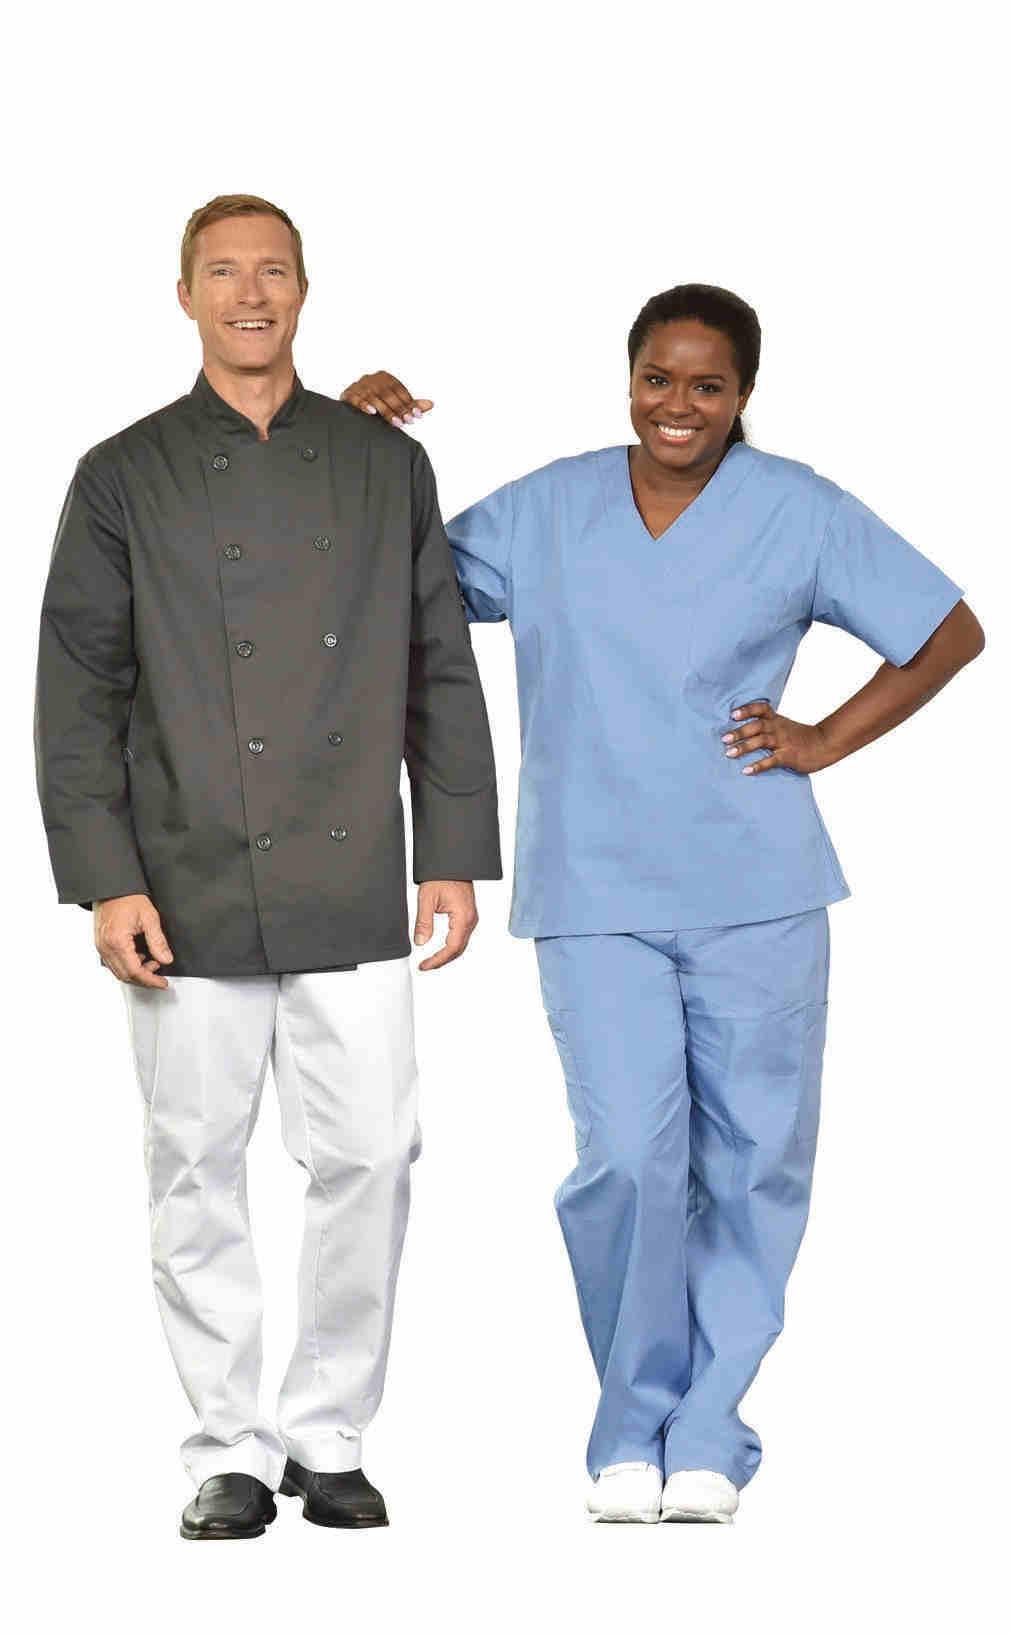 AddITIOnAl new PROduCTs: 1005 Zippered Apron Details on page 21 5300lds Ladies Chef Coat Details on page 5 3040 Baggy Chef Pants Charcoal, Tan, Navy and Pinstripe Details on page 16 6130KC - ESD Lab